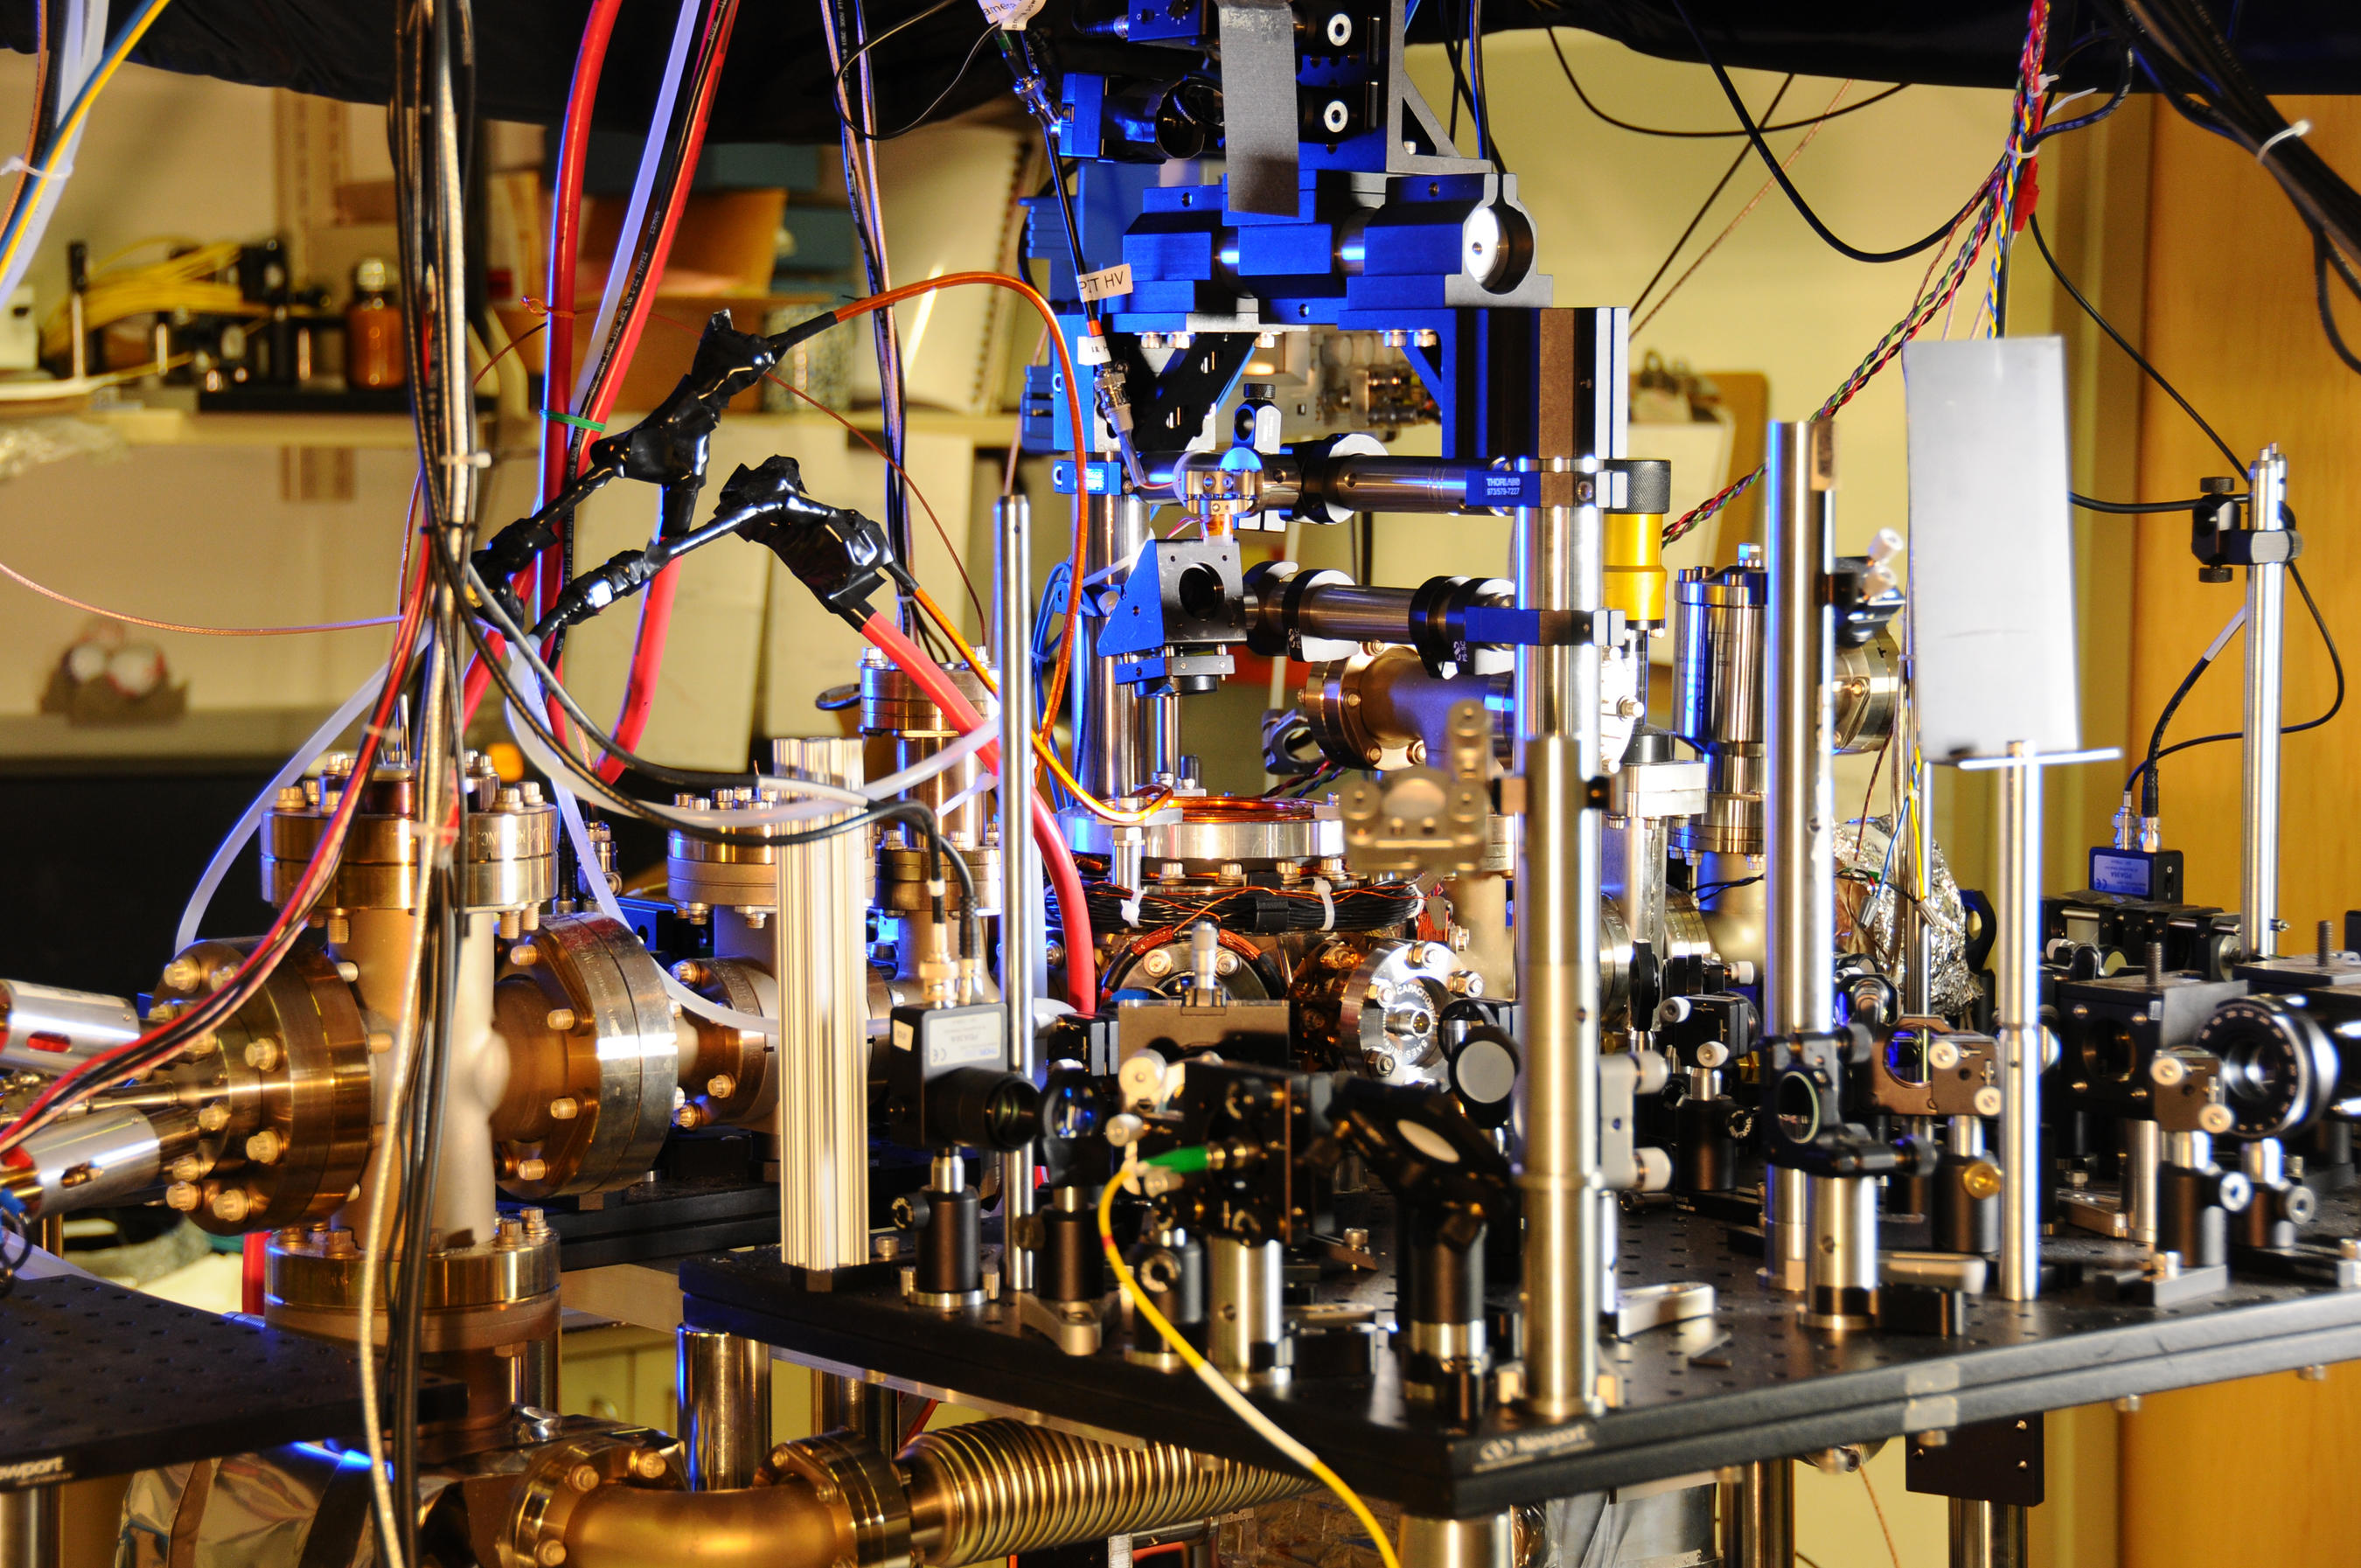 NIST Ytterbium Atomic Clocks Set Record for Stability | NIST